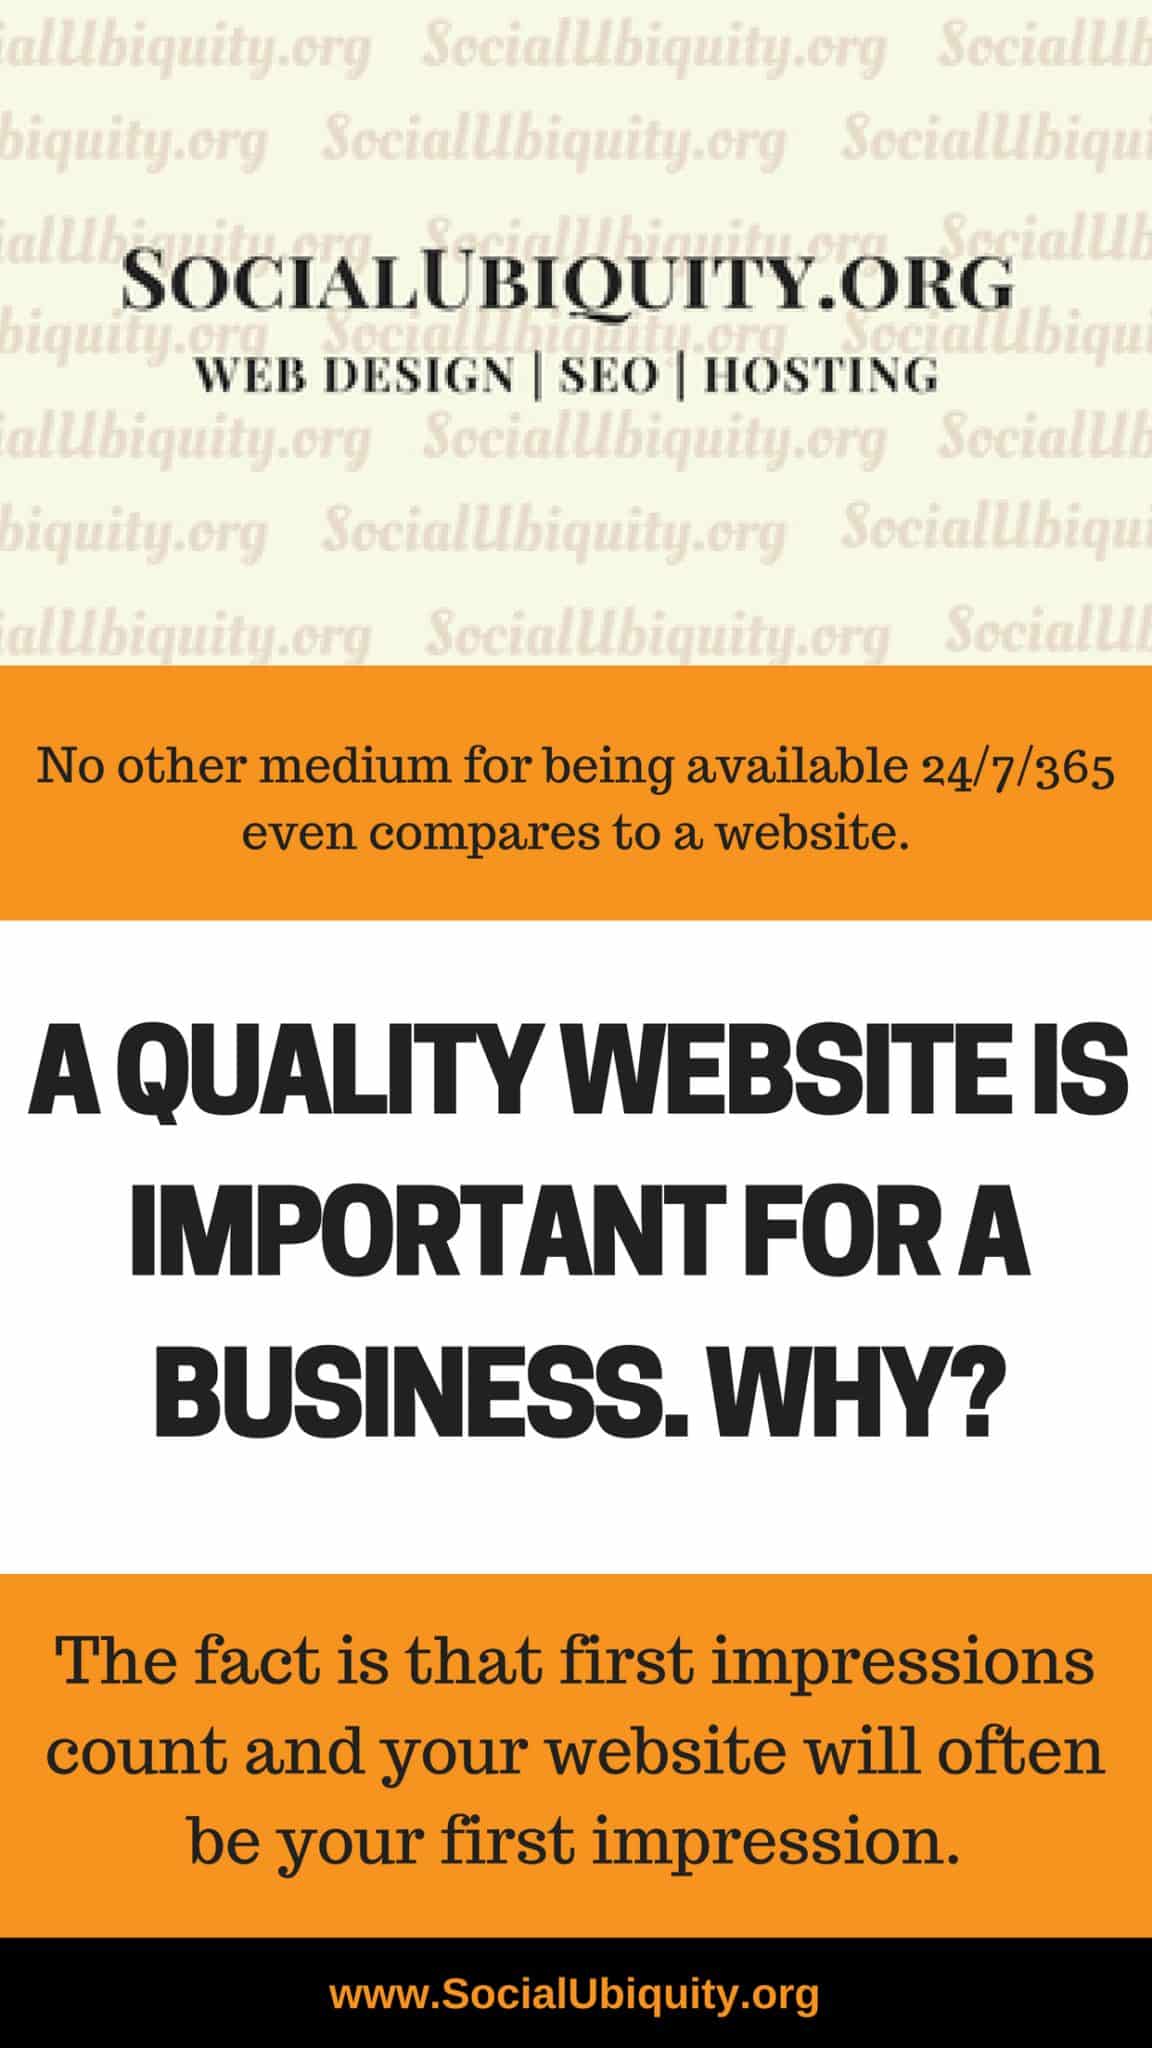 A quality website is important why